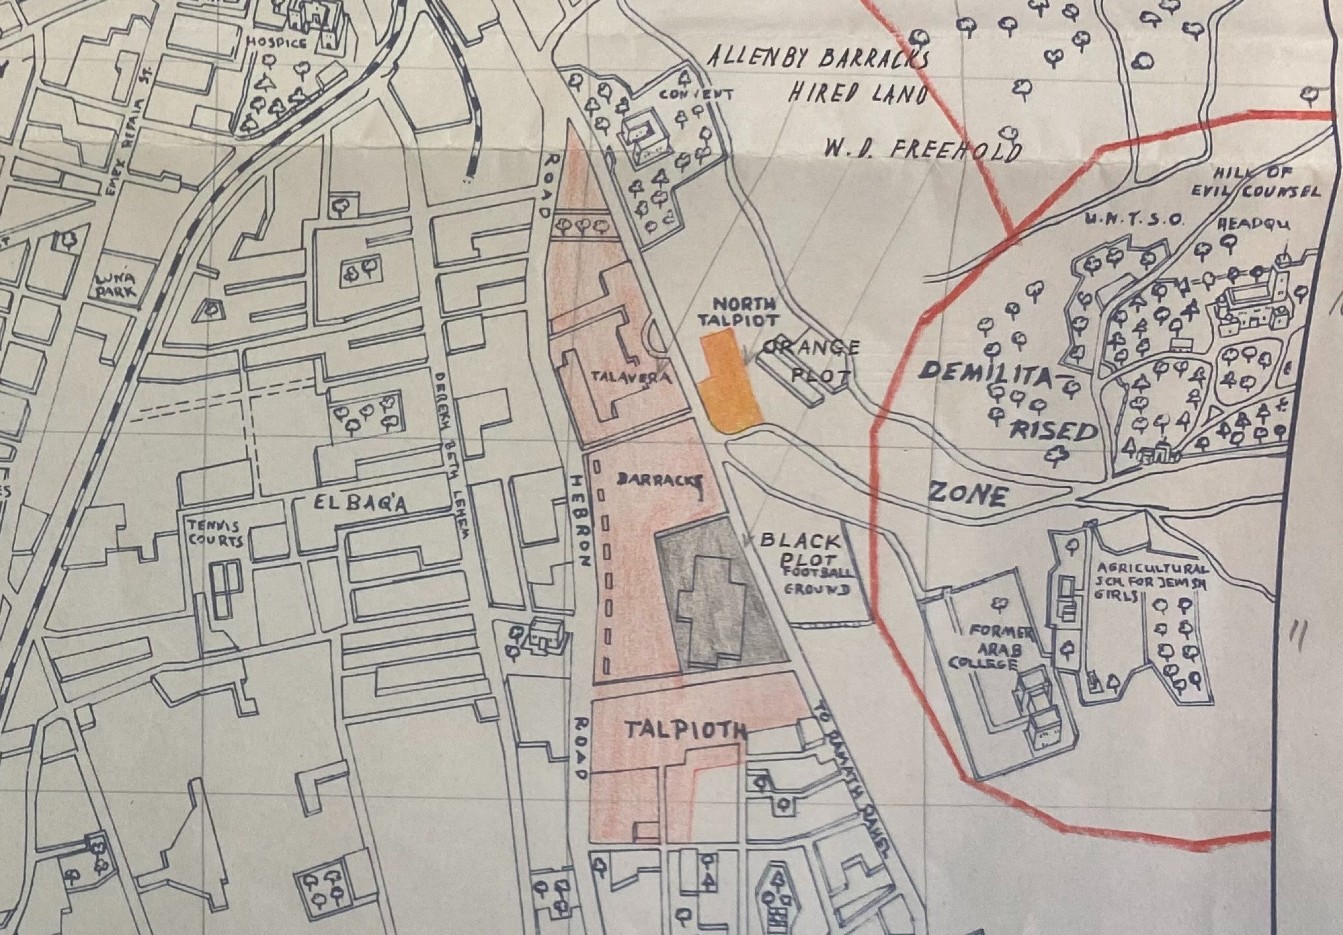 A 1959 map of Jerusalem showing the Orange Plot found in Foreign Office documents (National Archive)